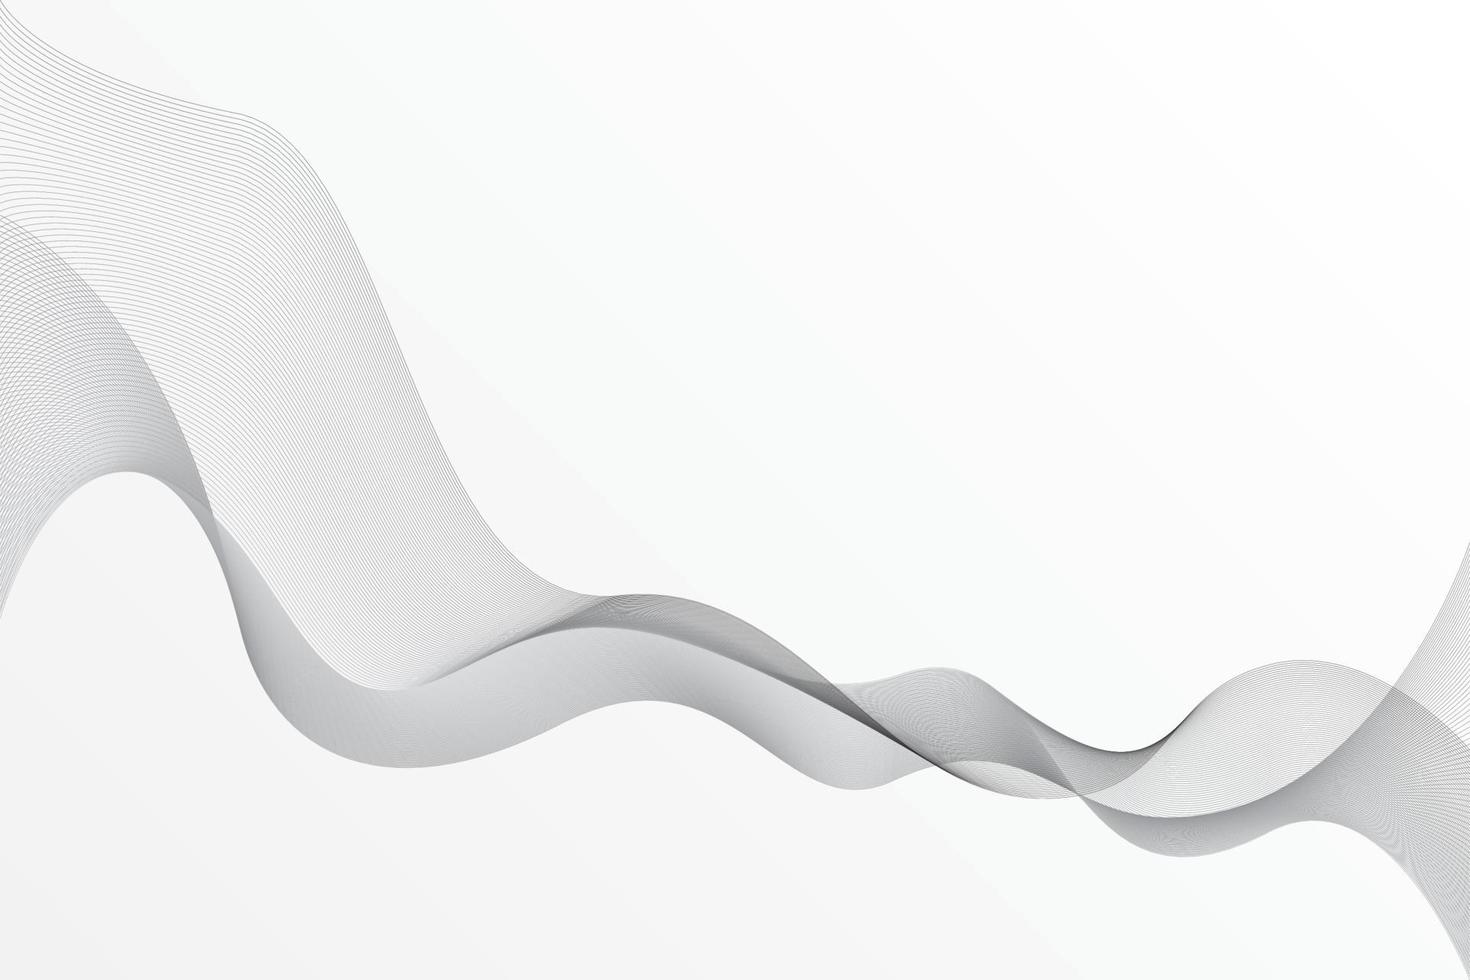 Abstract wave element on gray background with modern stripes. Vector illustration.